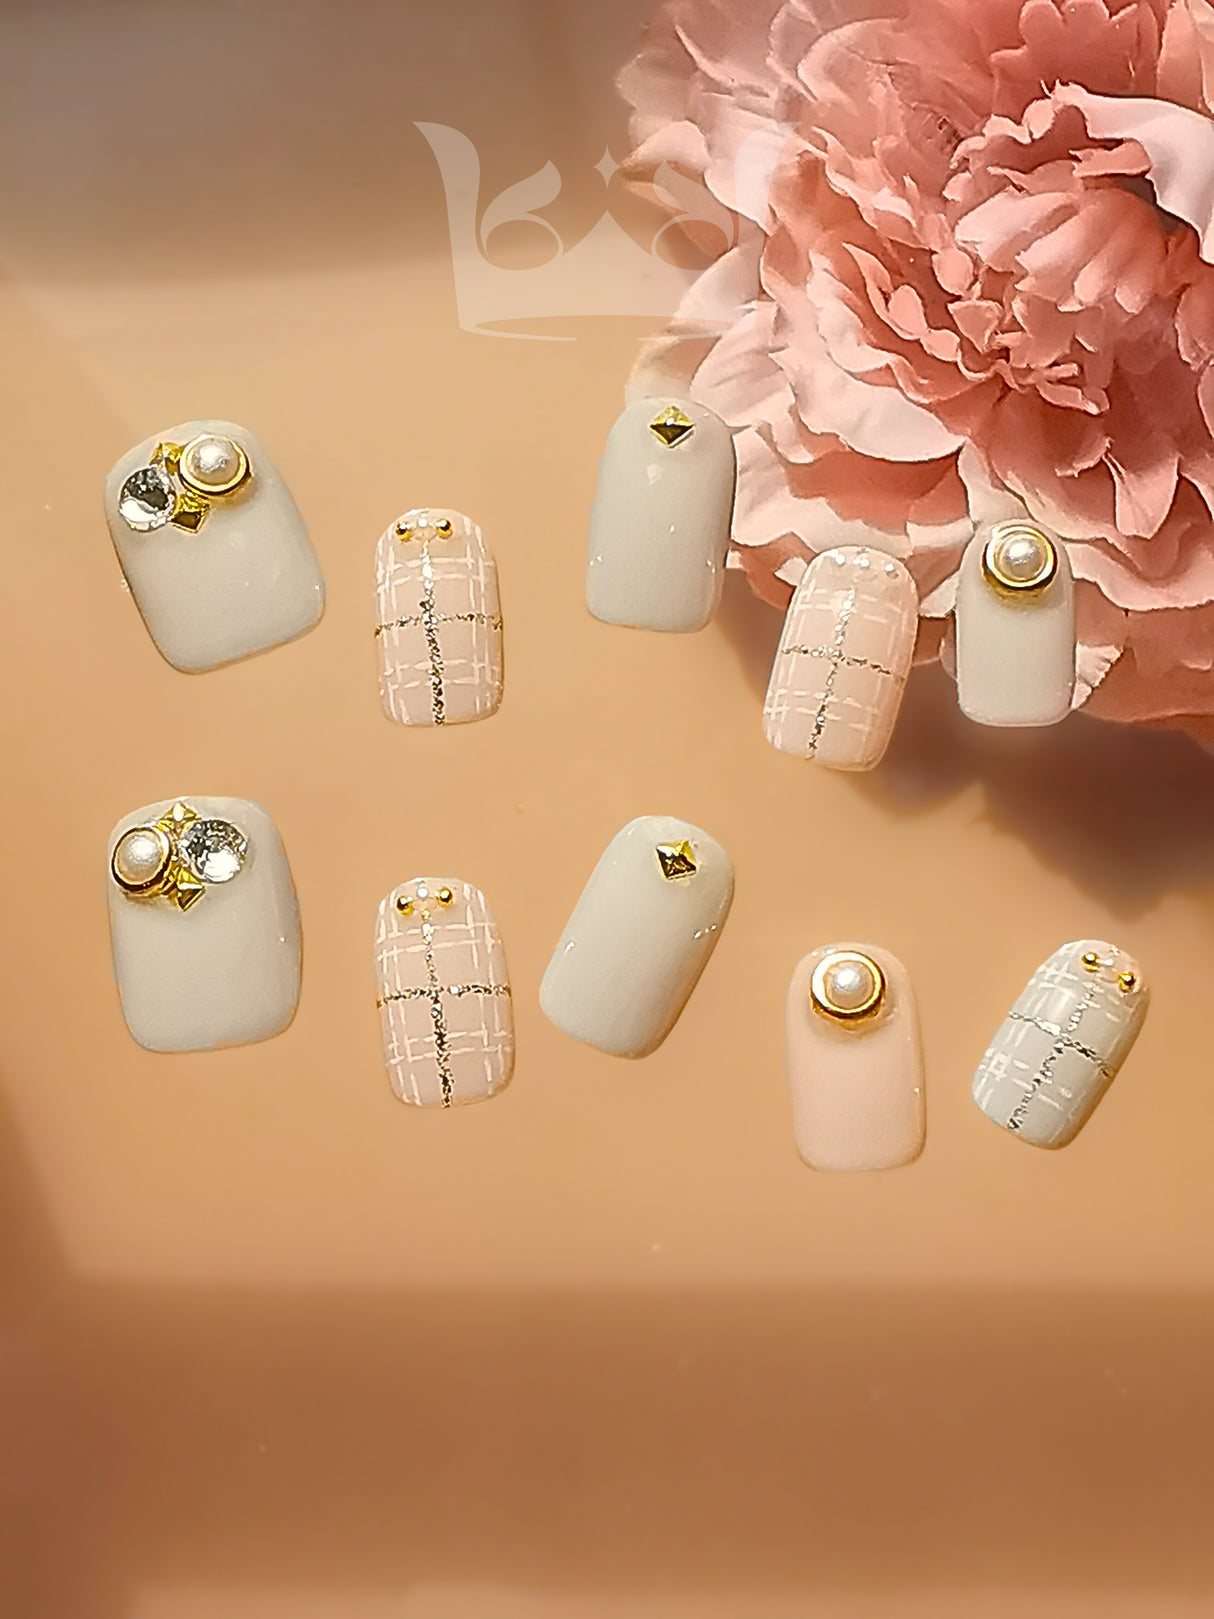 These press-on nails are meant for special occasions, with trendy designs and gold embellishments. The soft pastel base adds a feminine touch to the elegant and fancy overall design.